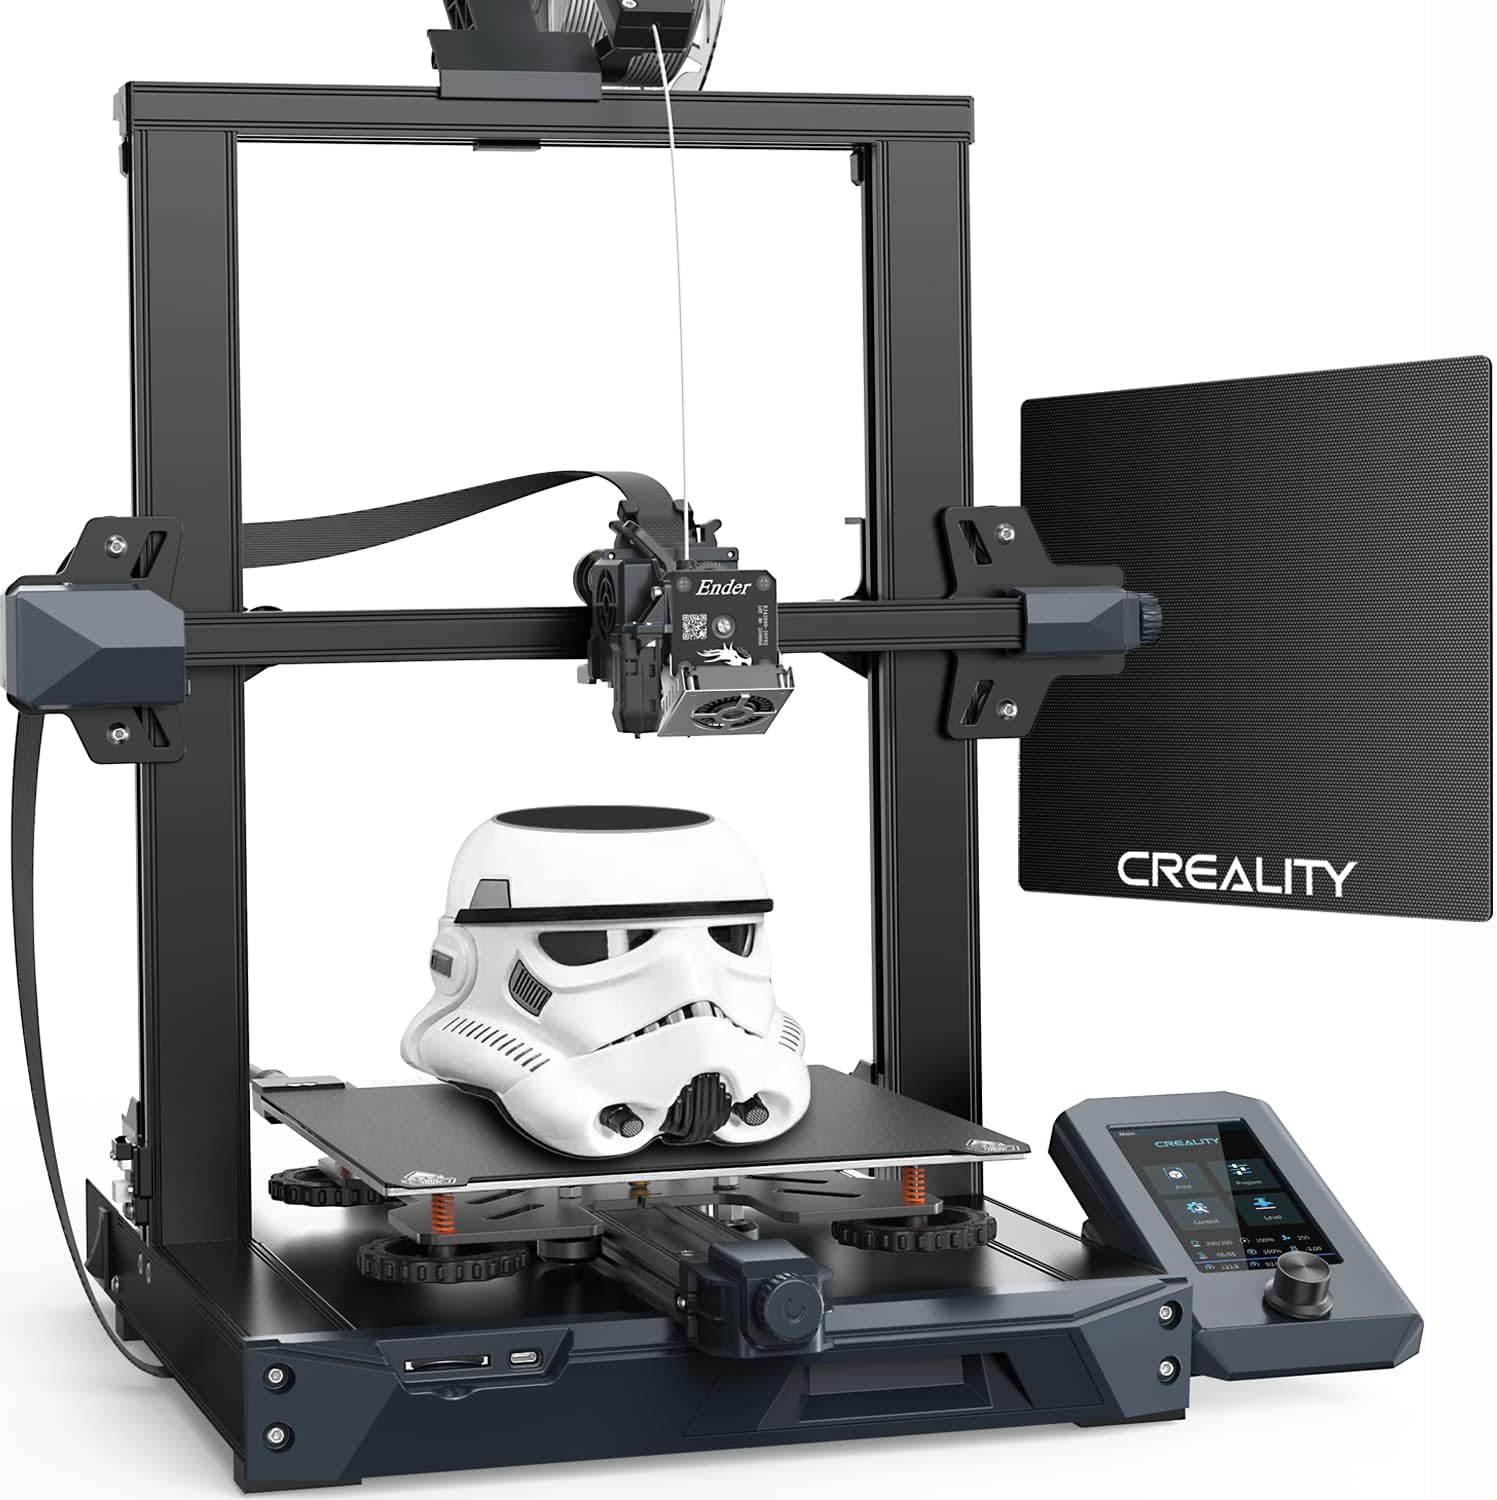 Creality Official 3D Printer Ender 3 8.6x8.6x9.8in DIY FDM Printer with UL Certified Meanwell Power Supply and Resume Printing Function for Beginner and Pro